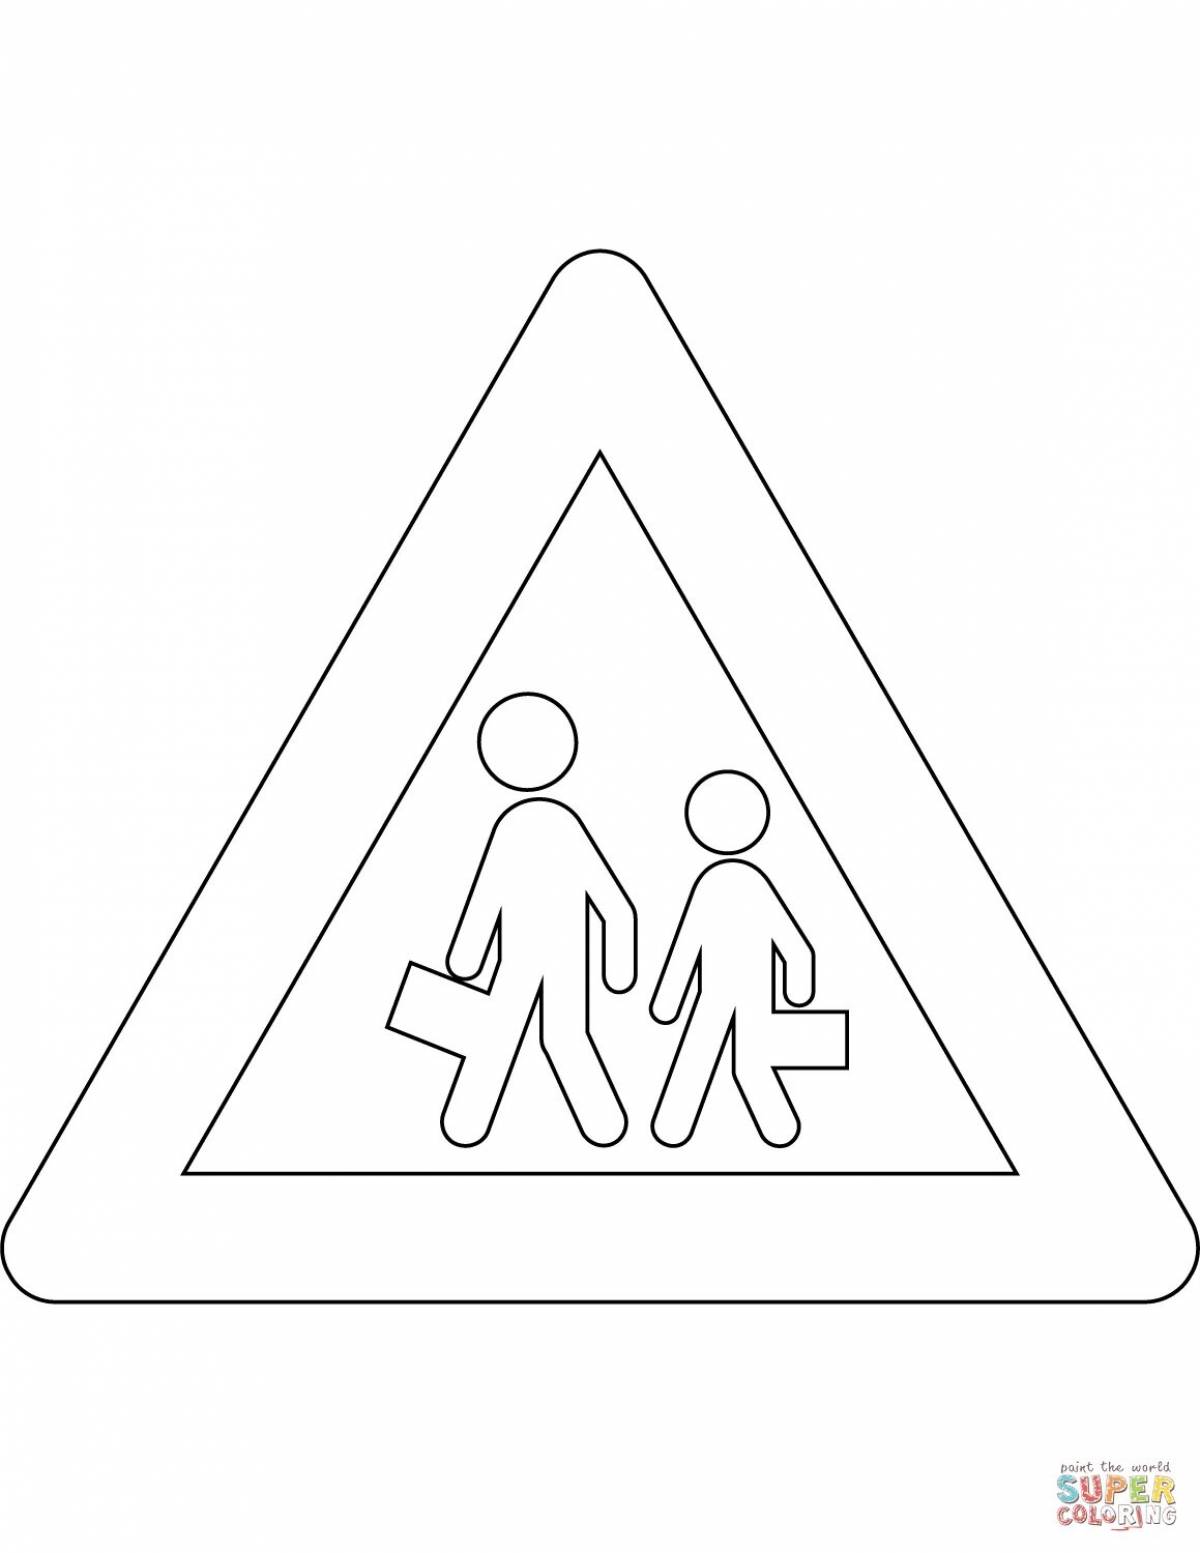 Traffic signs for preschoolers #19